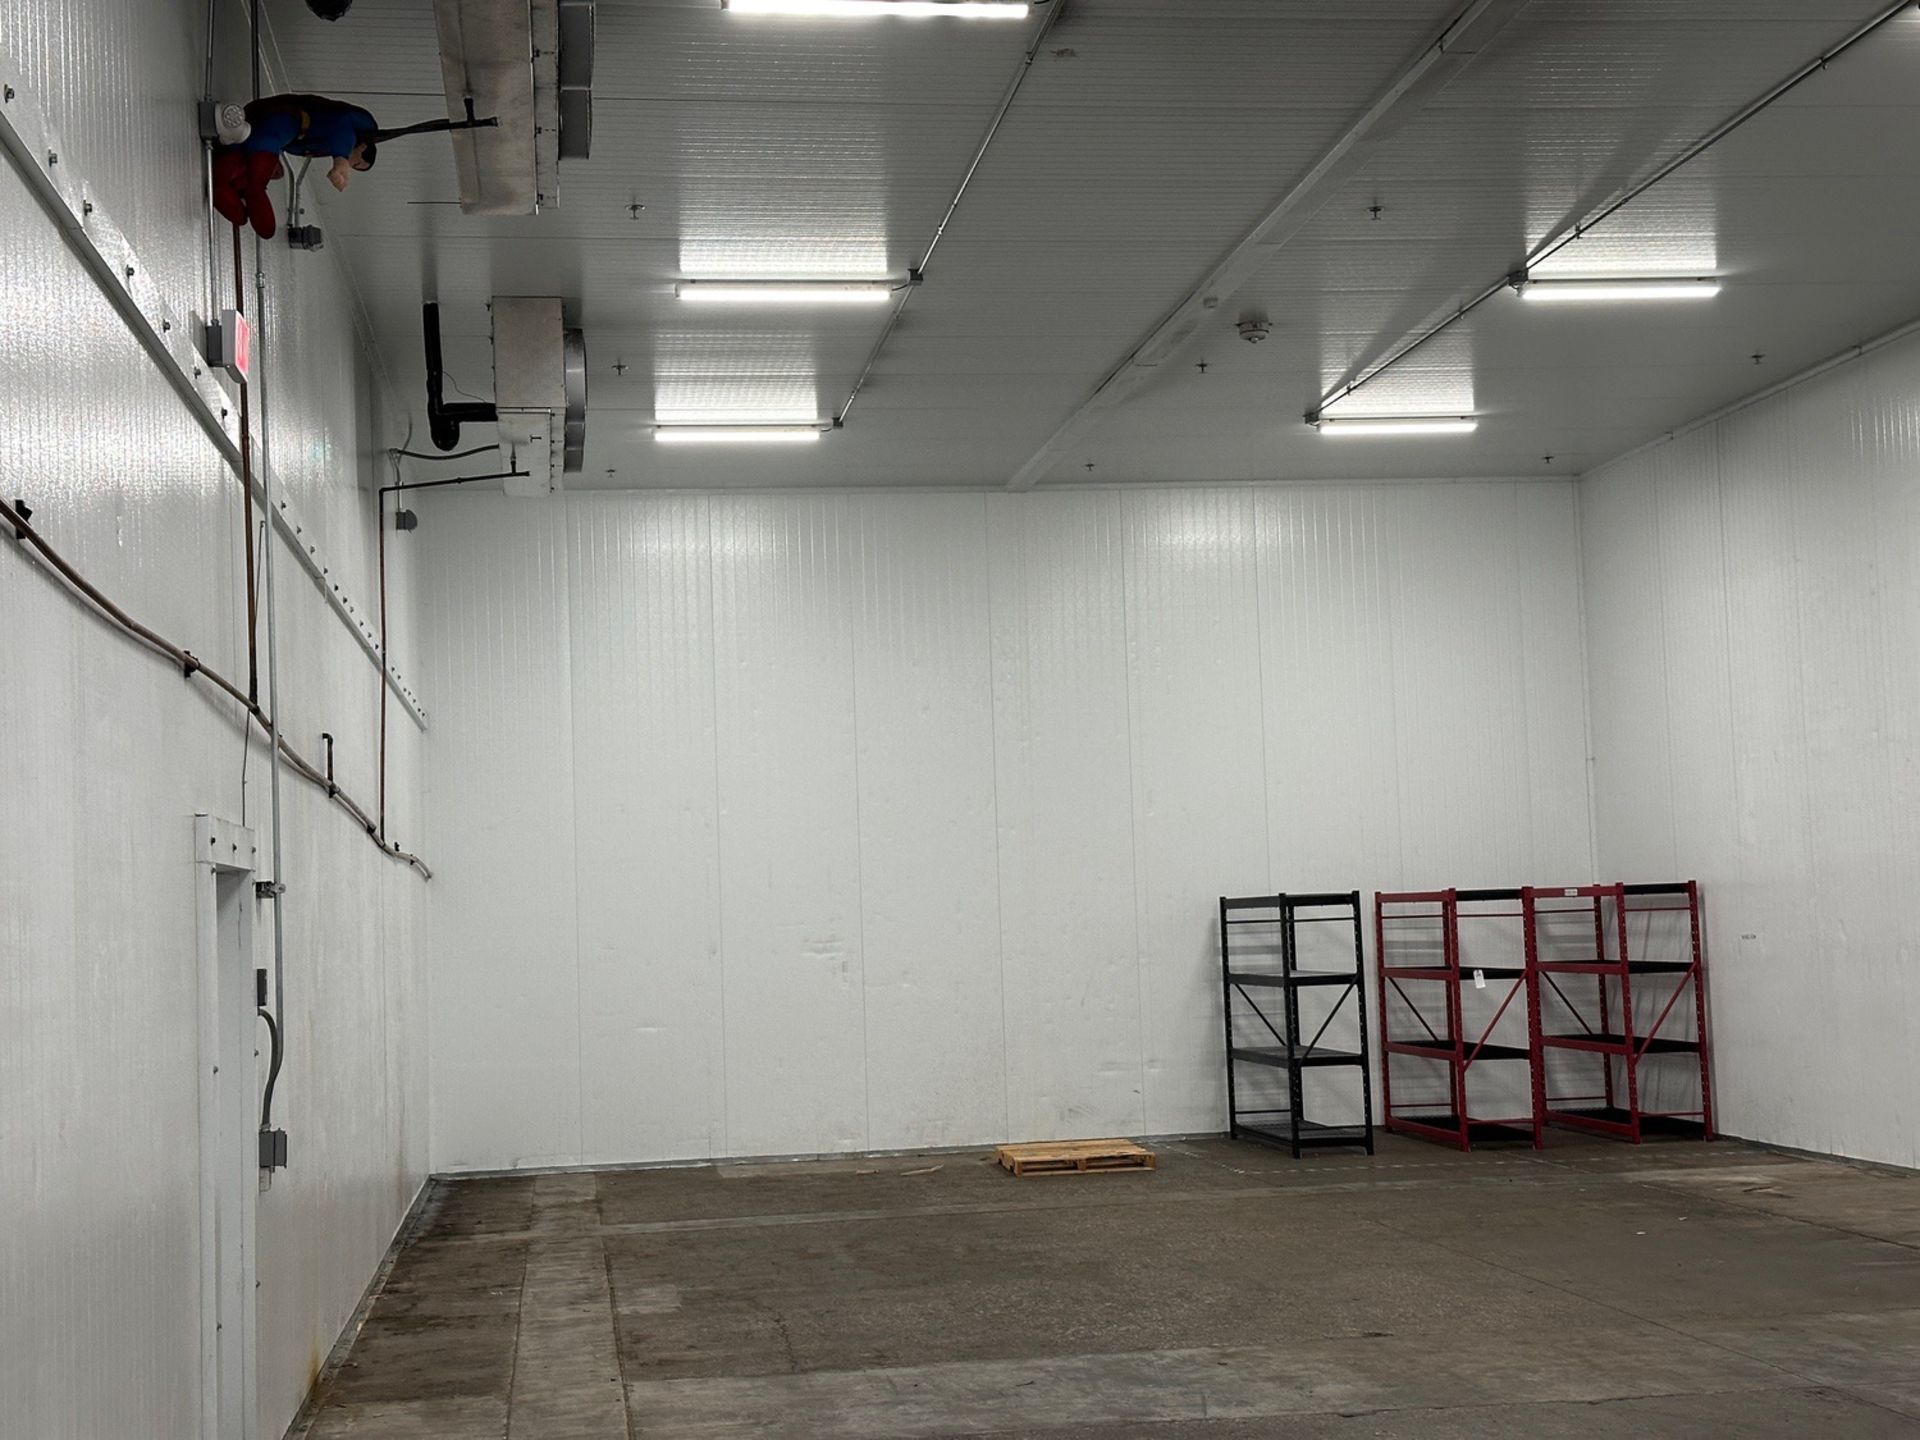 Cold Box - (3) Cooling Units - Shared Wall - (Approx. 32' x 77' x 18' - | Rig Fee $Contact Rigger - Image 4 of 14